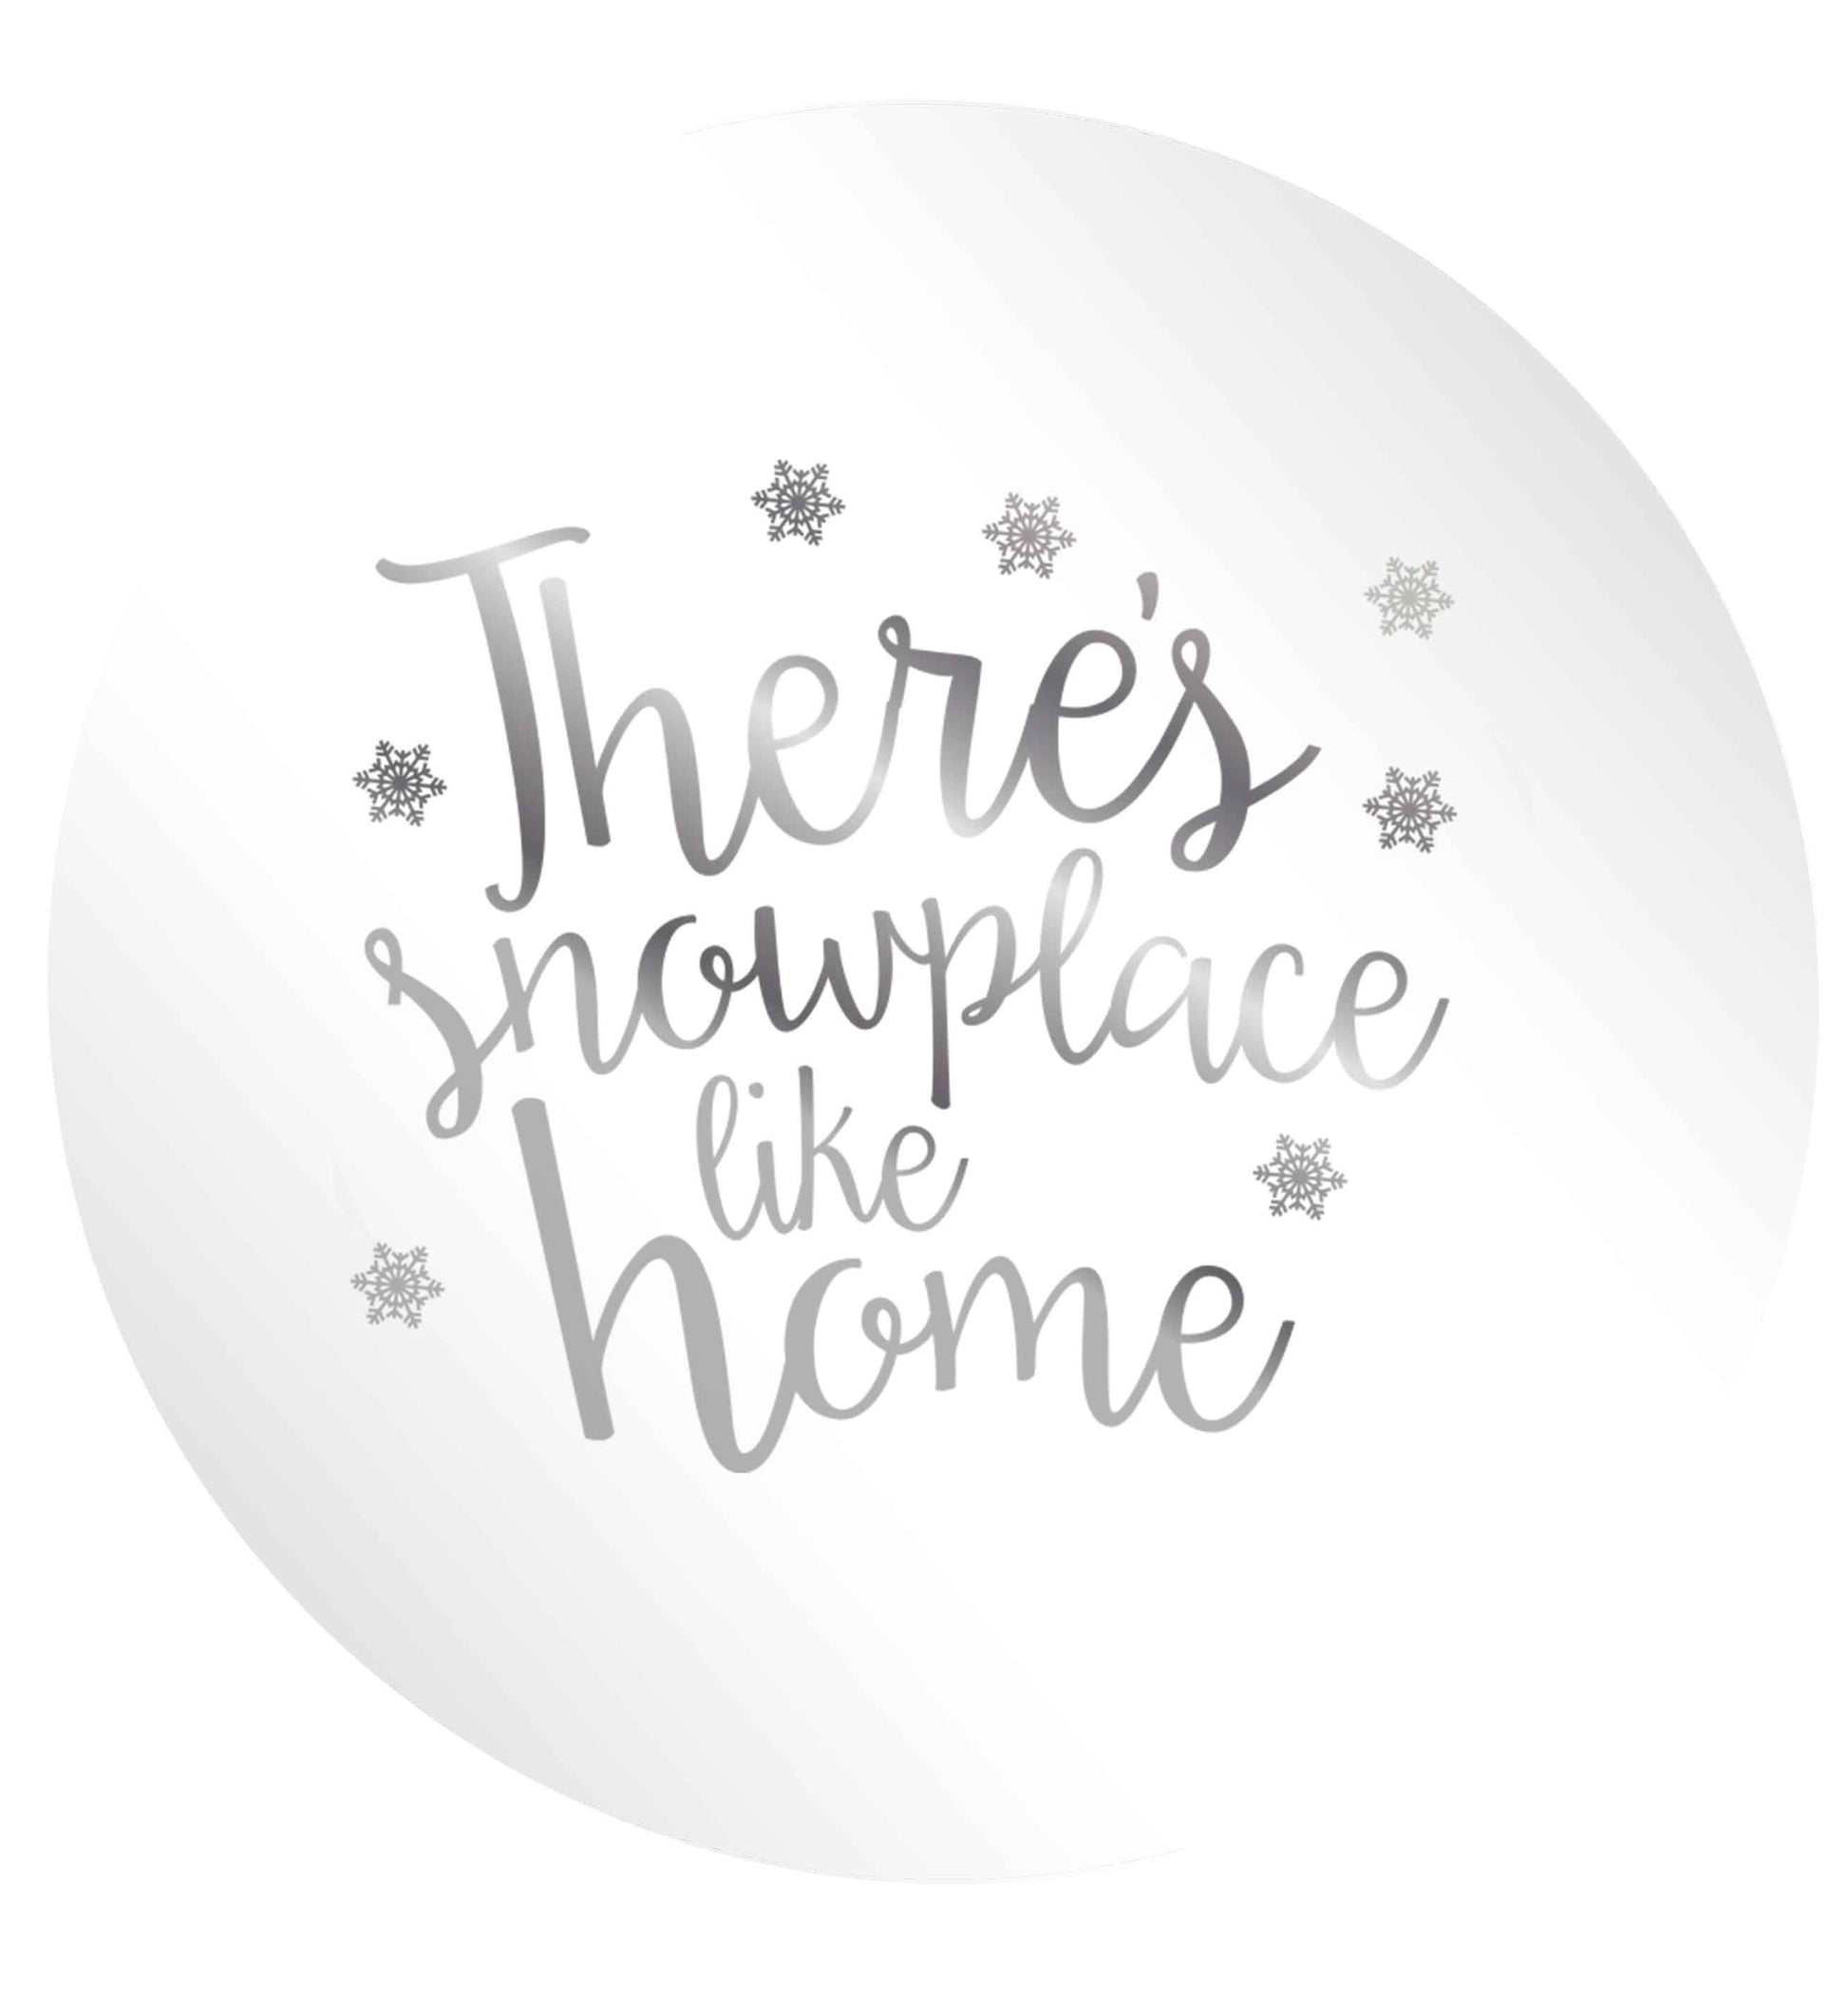 There's snowplace like home - metallic silver 24 @ 45mm matt circle stickers